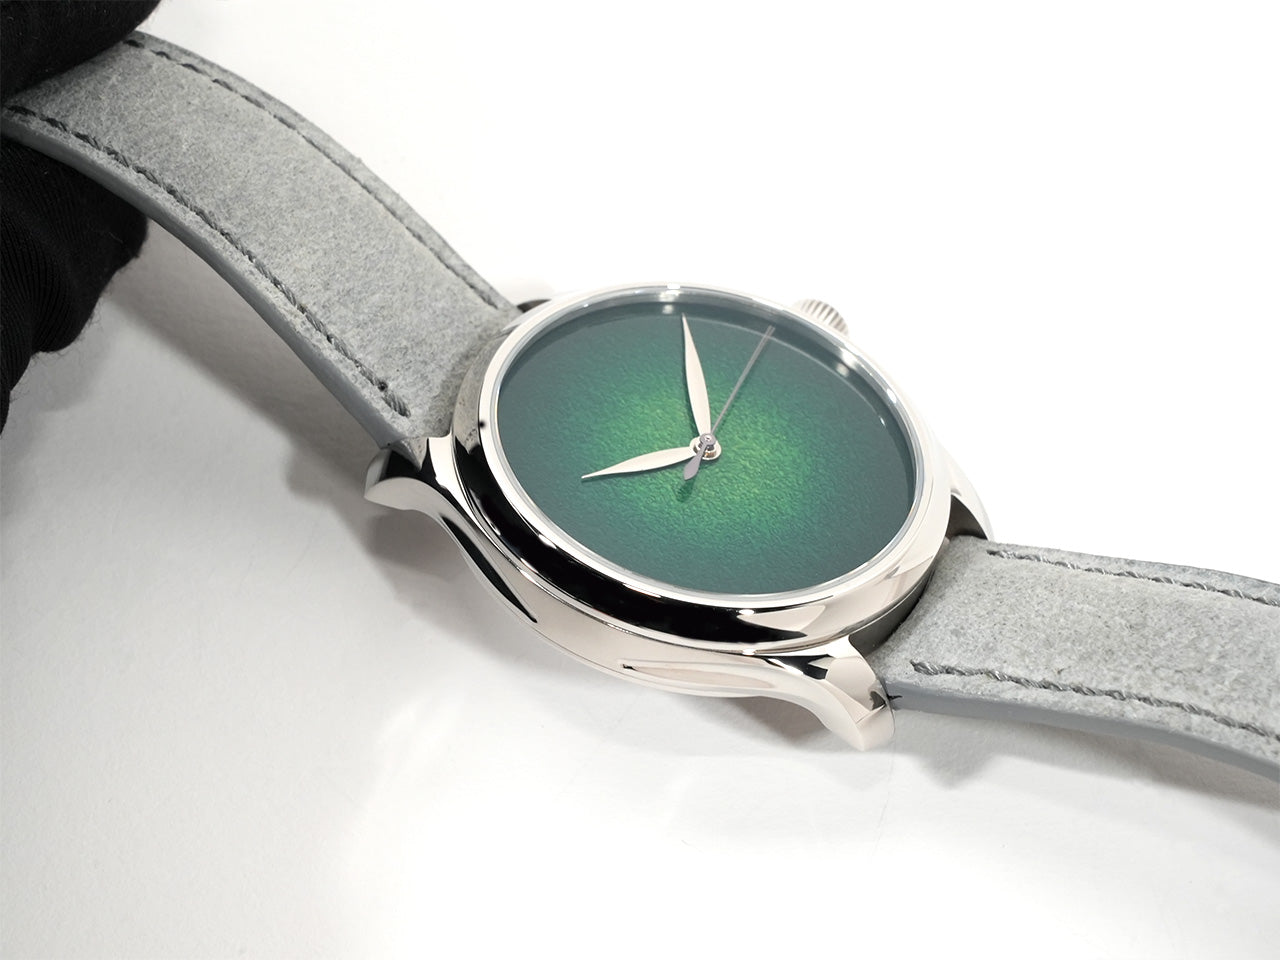 H. Moser &amp; Cie. Endeavor Center Second Concept Lime Green Ref.1200-1233 SS Lime Green Fume Dial